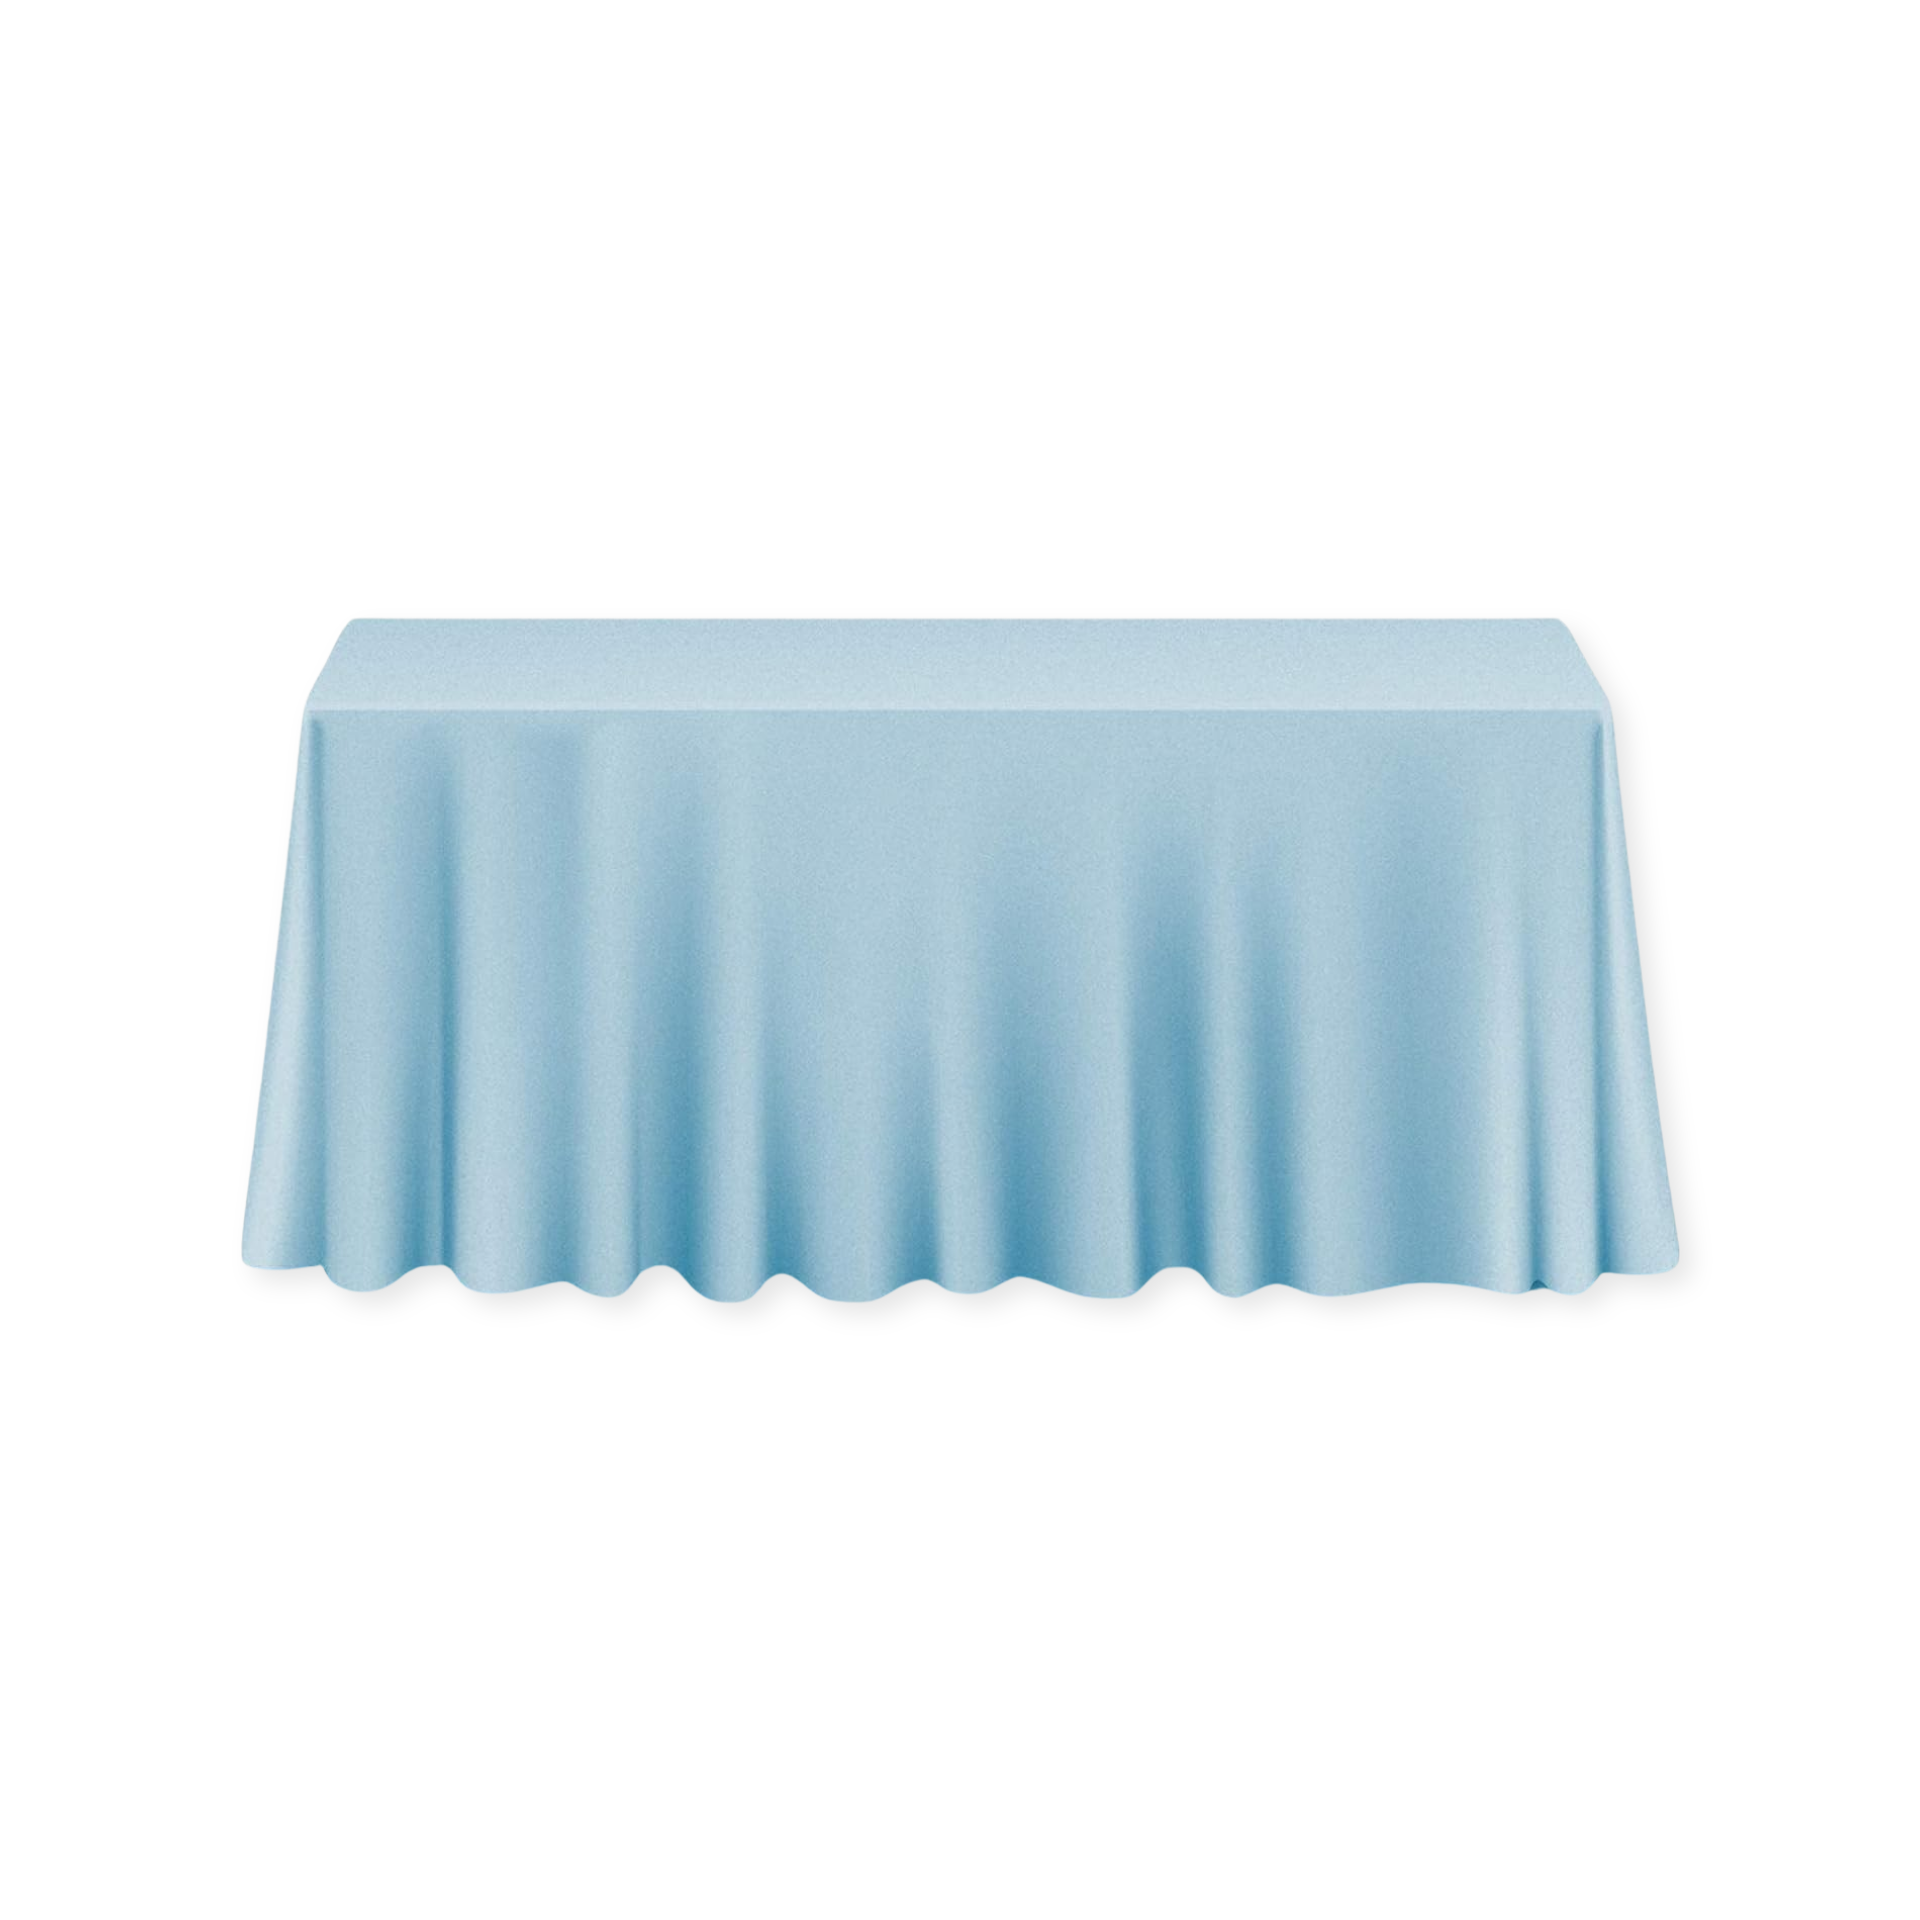 Tablecloth polyester rectangle dusty blue  commercial grade wedding party event rental panama city beach